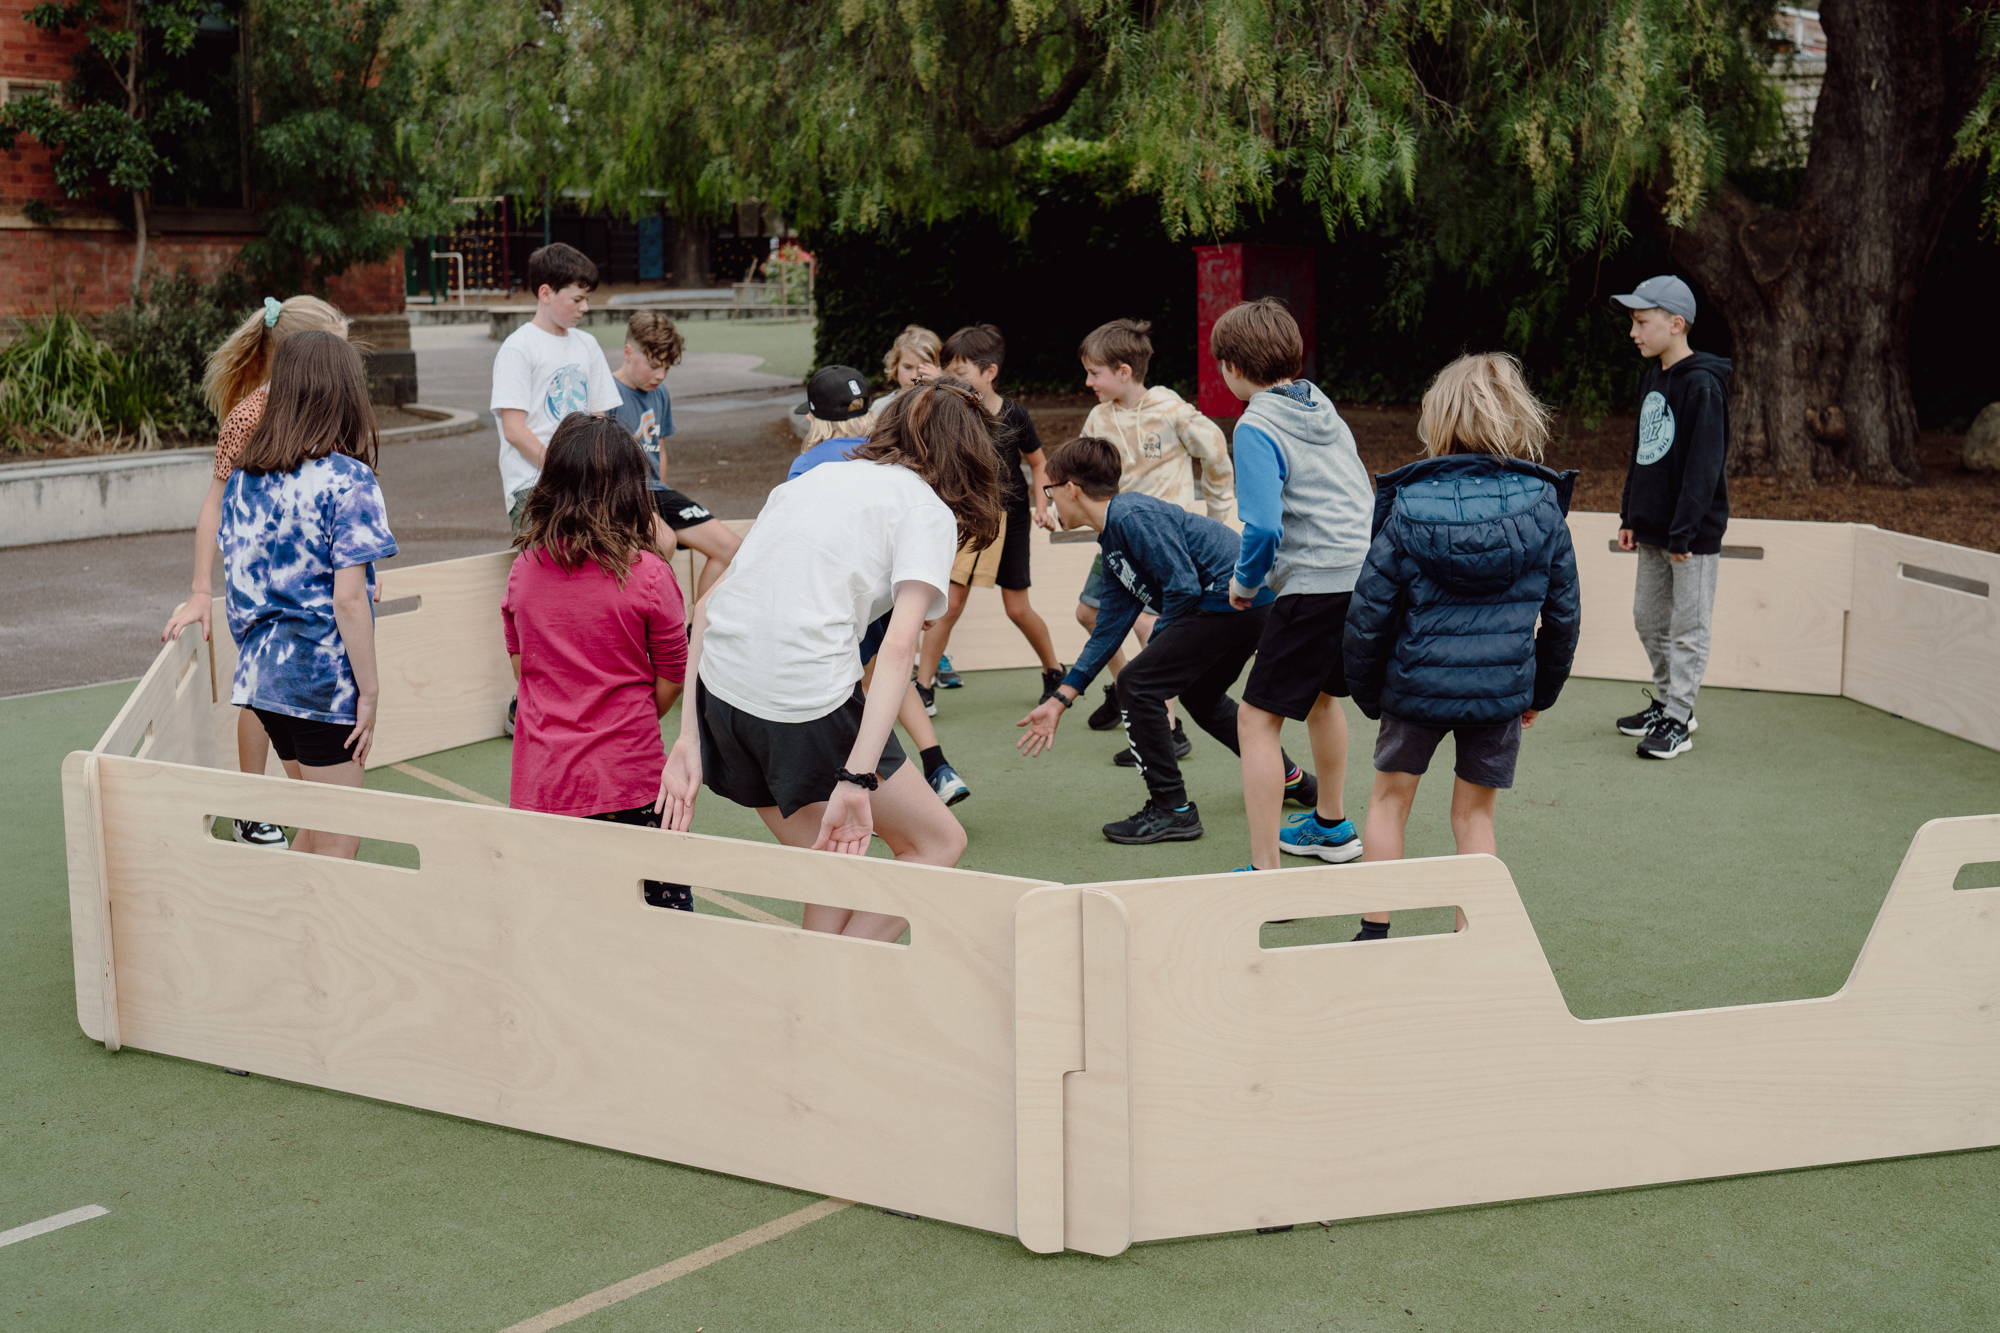 The rules of Gaga Ball - Played in Australia